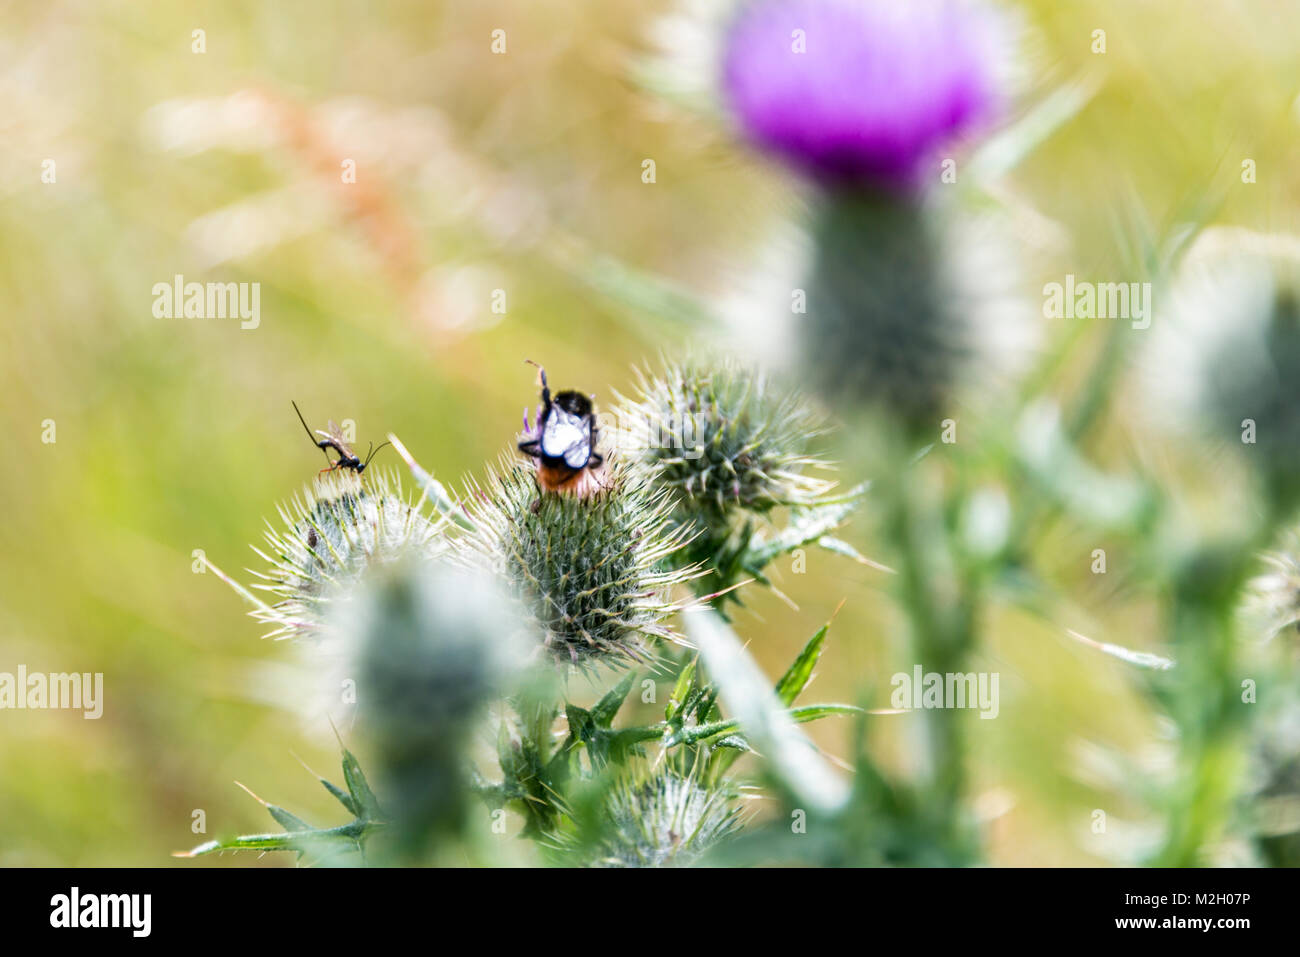 A white butterfly parasite (Cotesia glomerata) and a bumblebee on a thistle Stock Photo